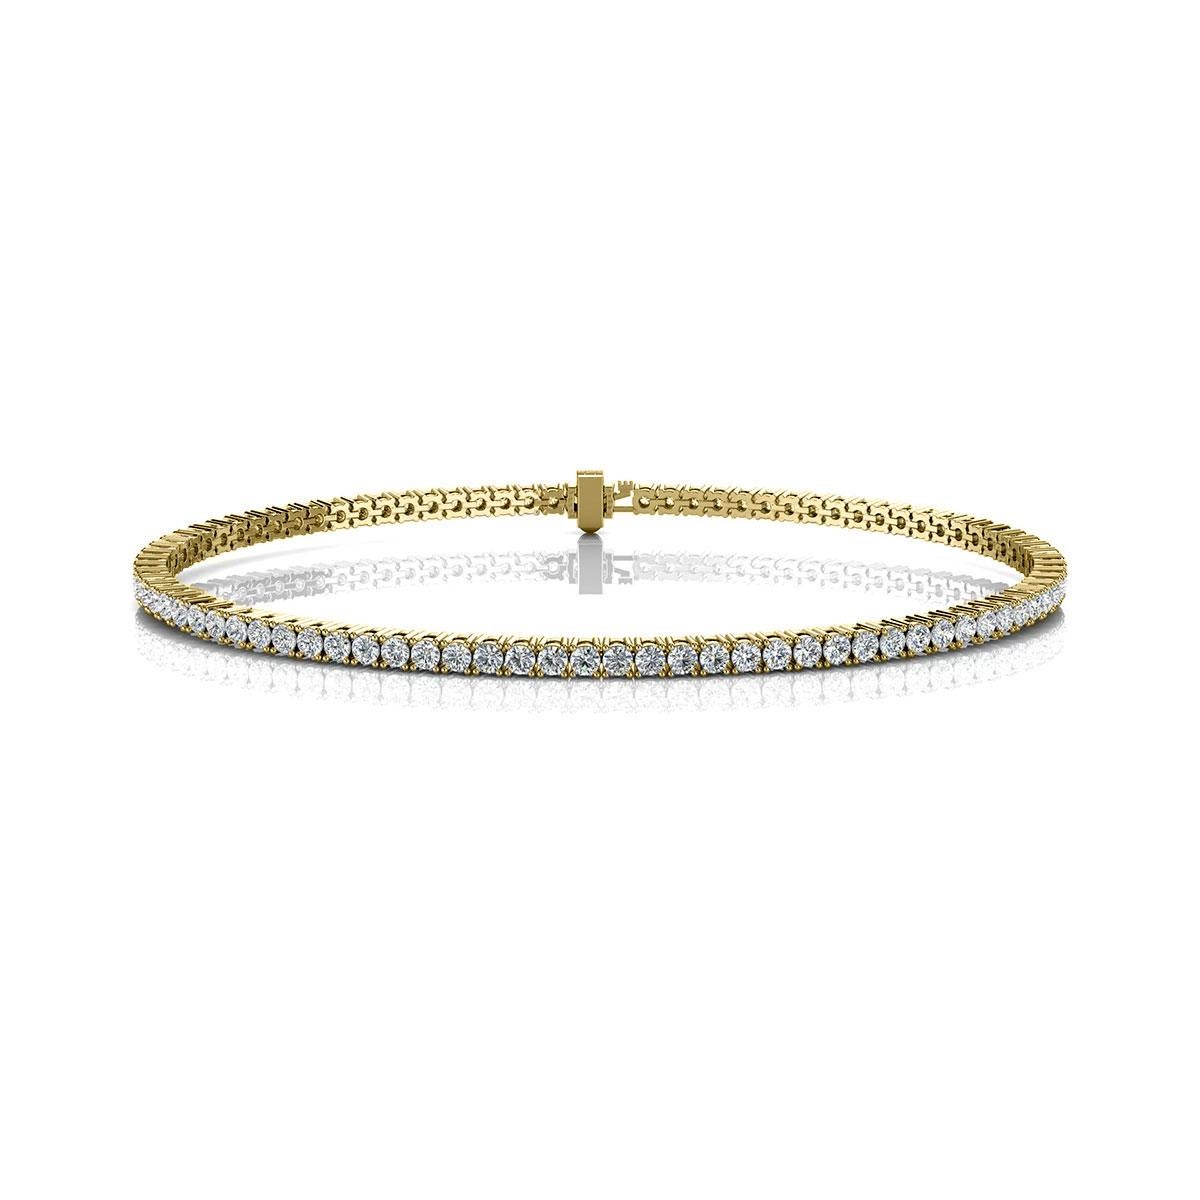 A timeless four prongs diamonds tennis bracelet. Experience the Difference!

Product details: 

Center Gemstone Type: NATURAL DIAMOND
Center Gemstone Color: WHITE
Center Gemstone Shape: ROUND
Center Diamond Carat Weight: 2
Metal: 18K Yellow